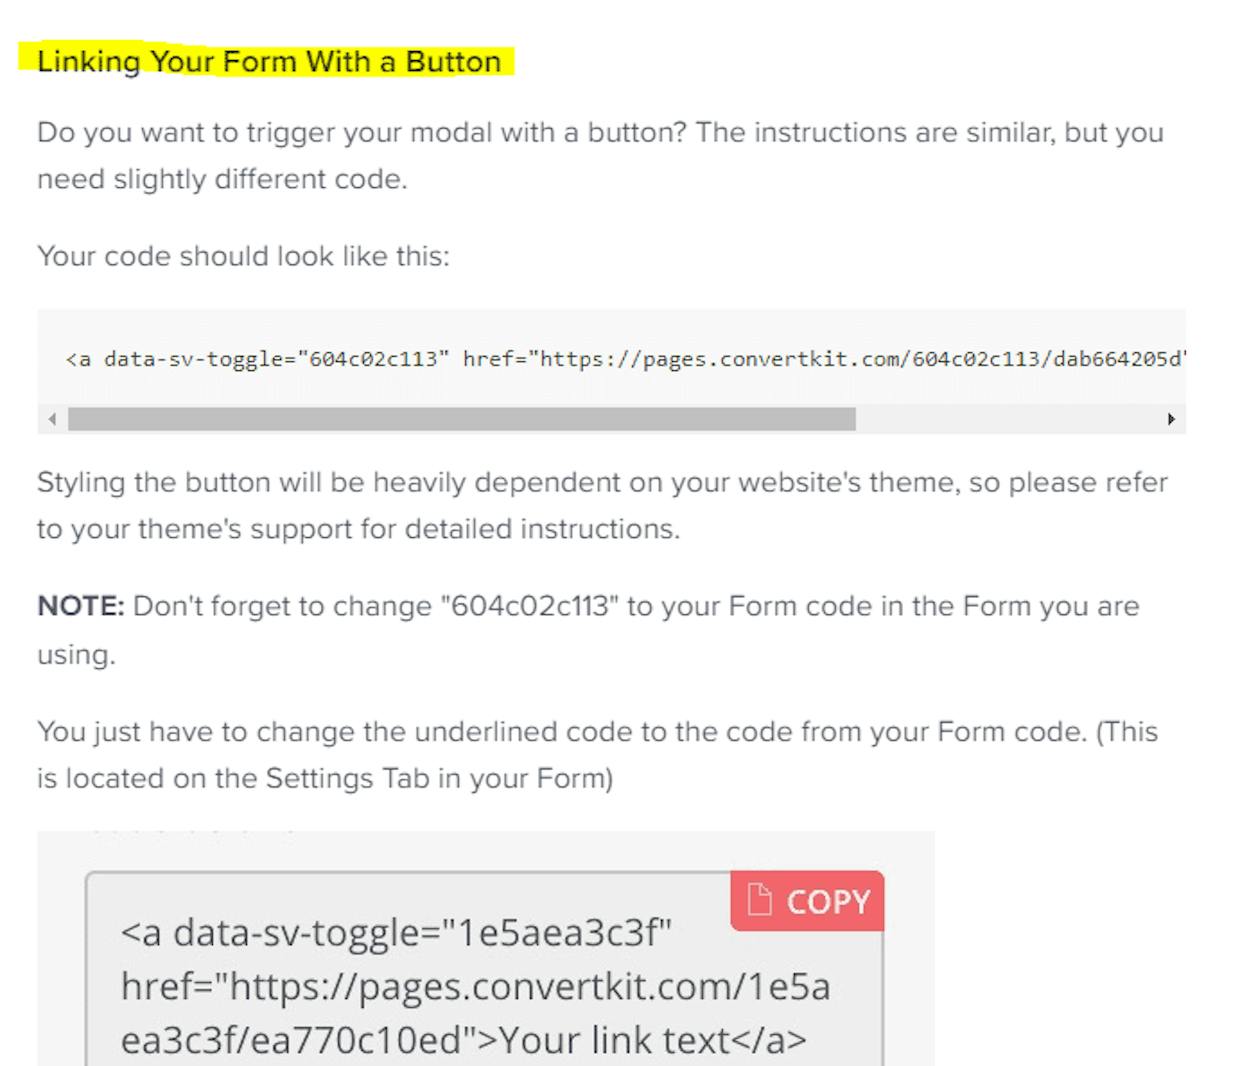 I'm having trouble adding a modal form triggered with a button click. I am embedding the javascript in the page header. I have the trigger link in the button code. When I click the button, the form pops up for an instant, then quicly goes to a new page where the form is the only thing displayed. I tried using the wordpress plugin instead of the javascript to no effect.  Any thoughts to prevent this and keep the modal form on the original page?